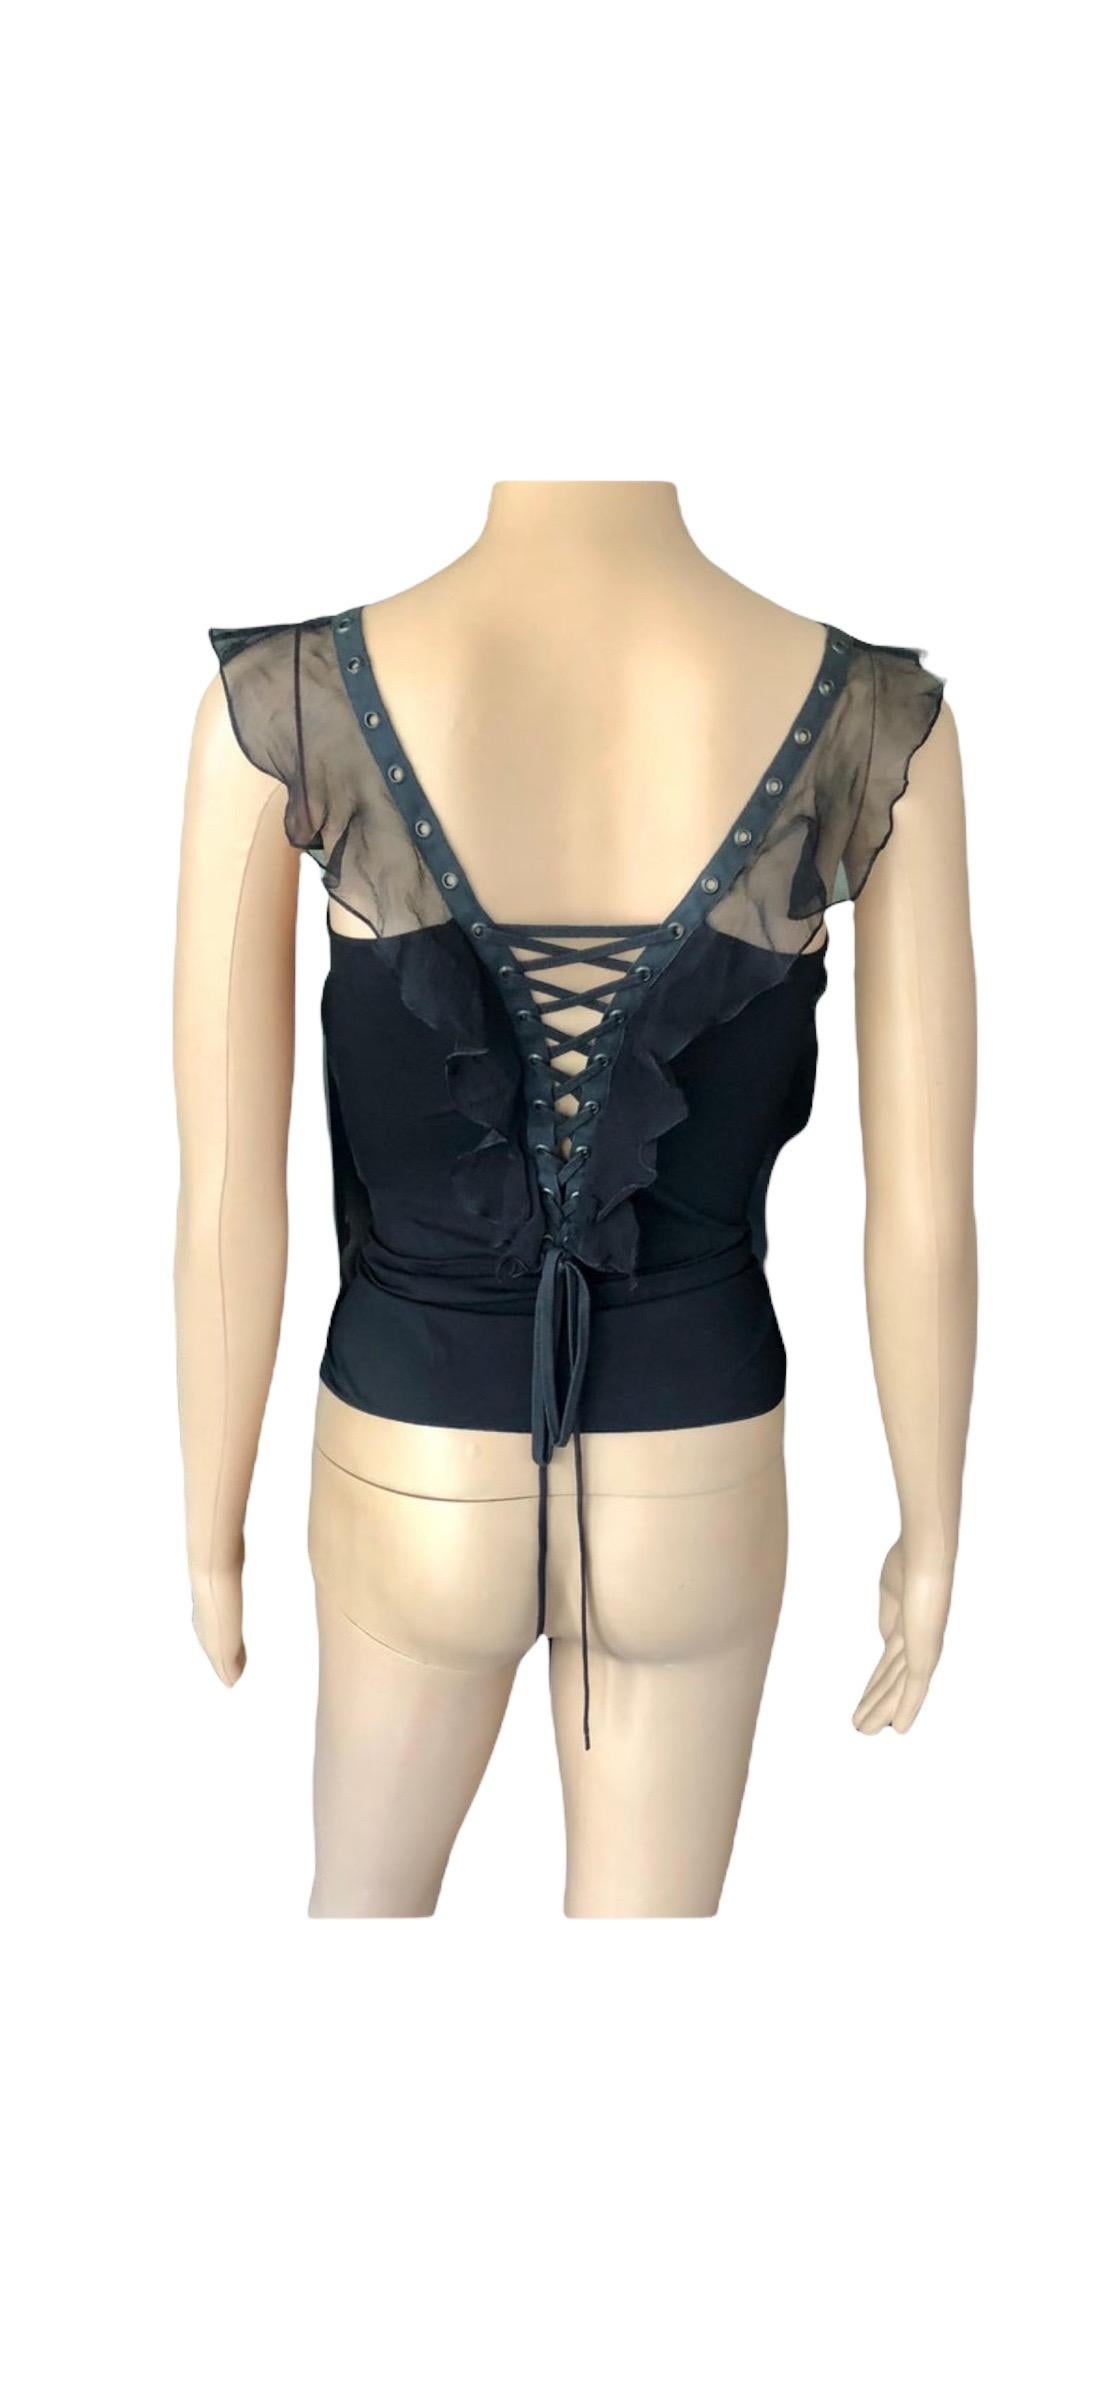 Christian Dior By John Galliano S/S 2003 Plunging Lace Up Tie Up Black Top For Sale 4